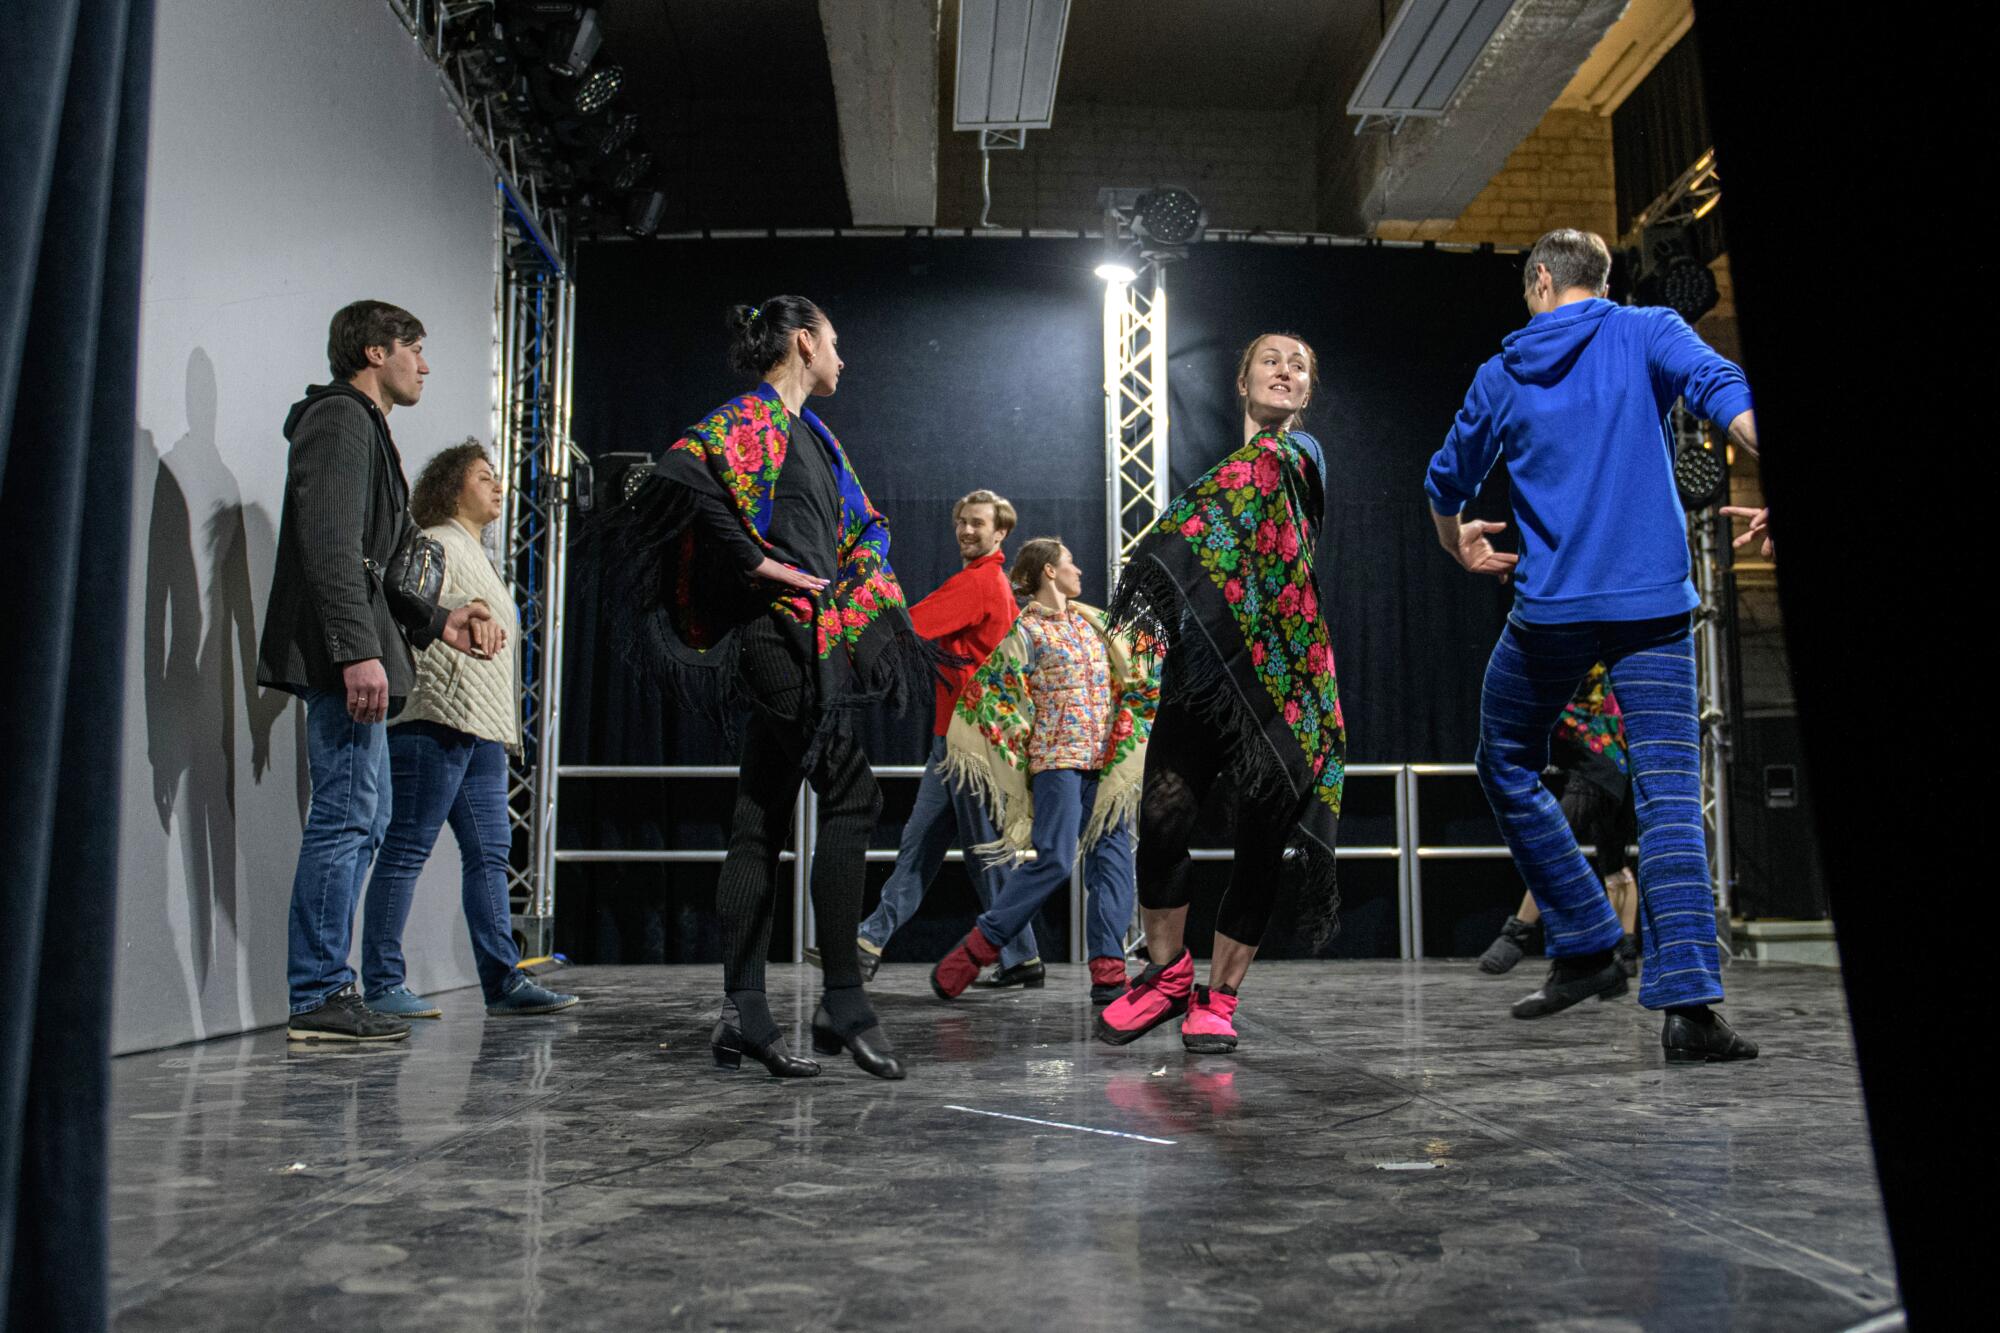 People in colorful clothing take part in a rehearsal 